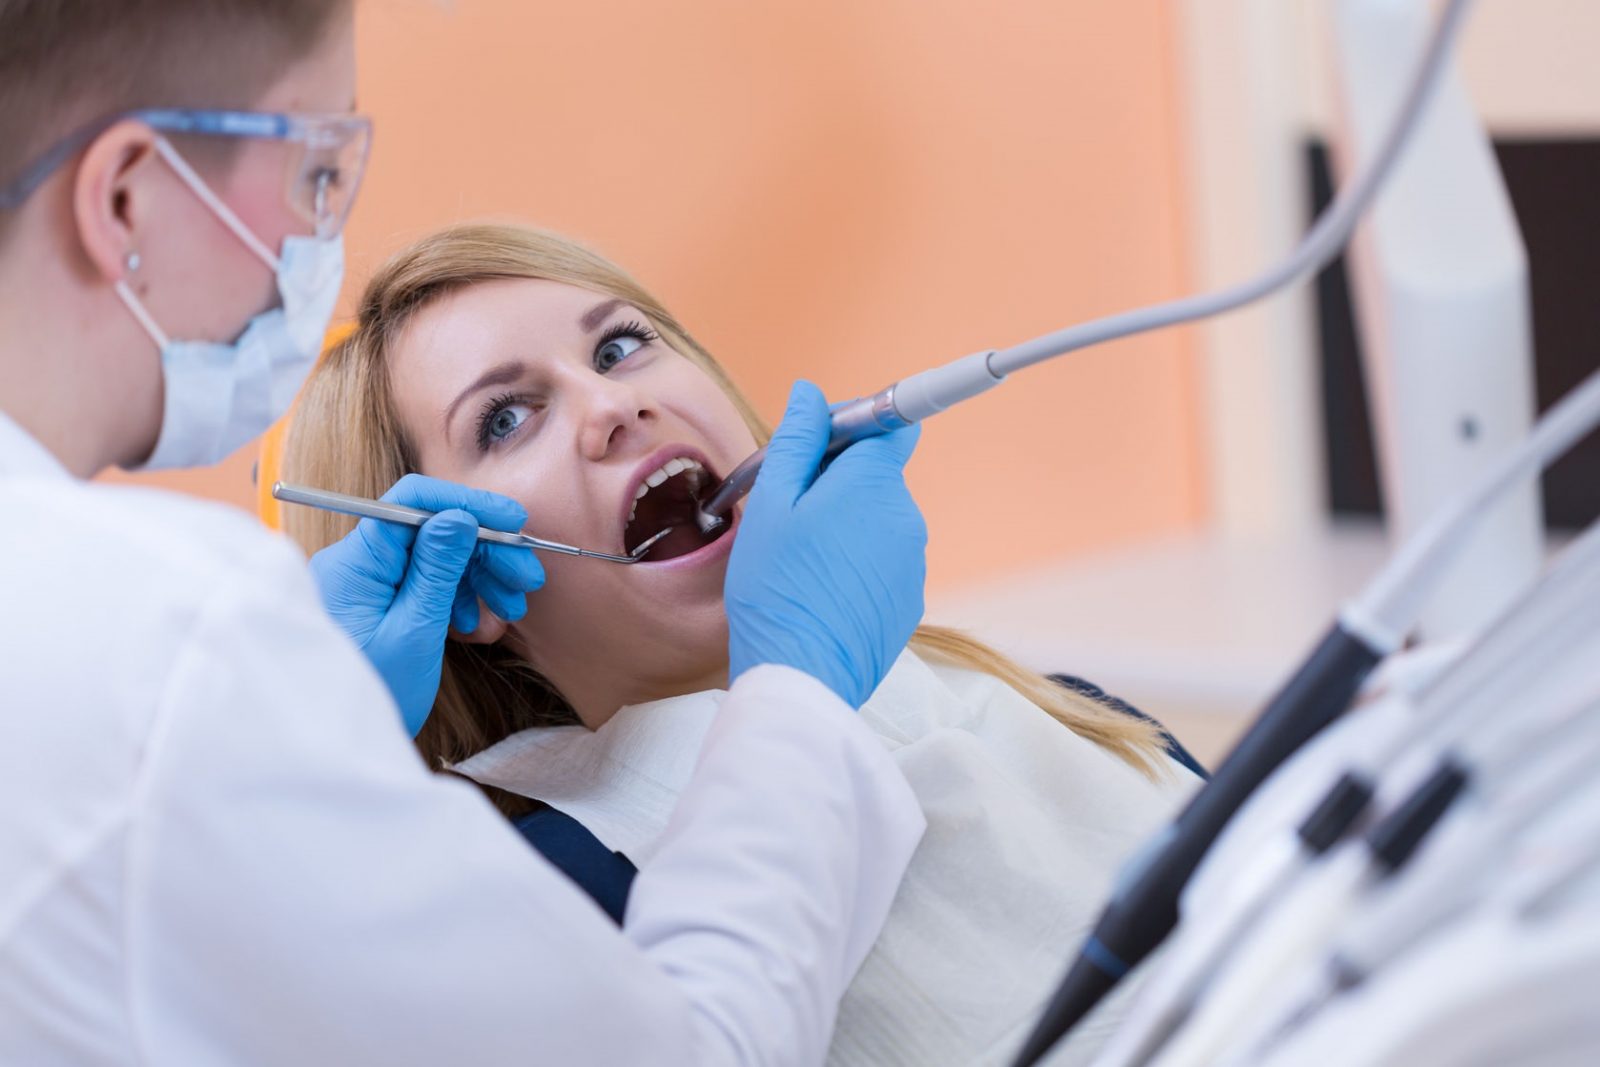 35650508 - dentist drilling a tooth of young woman